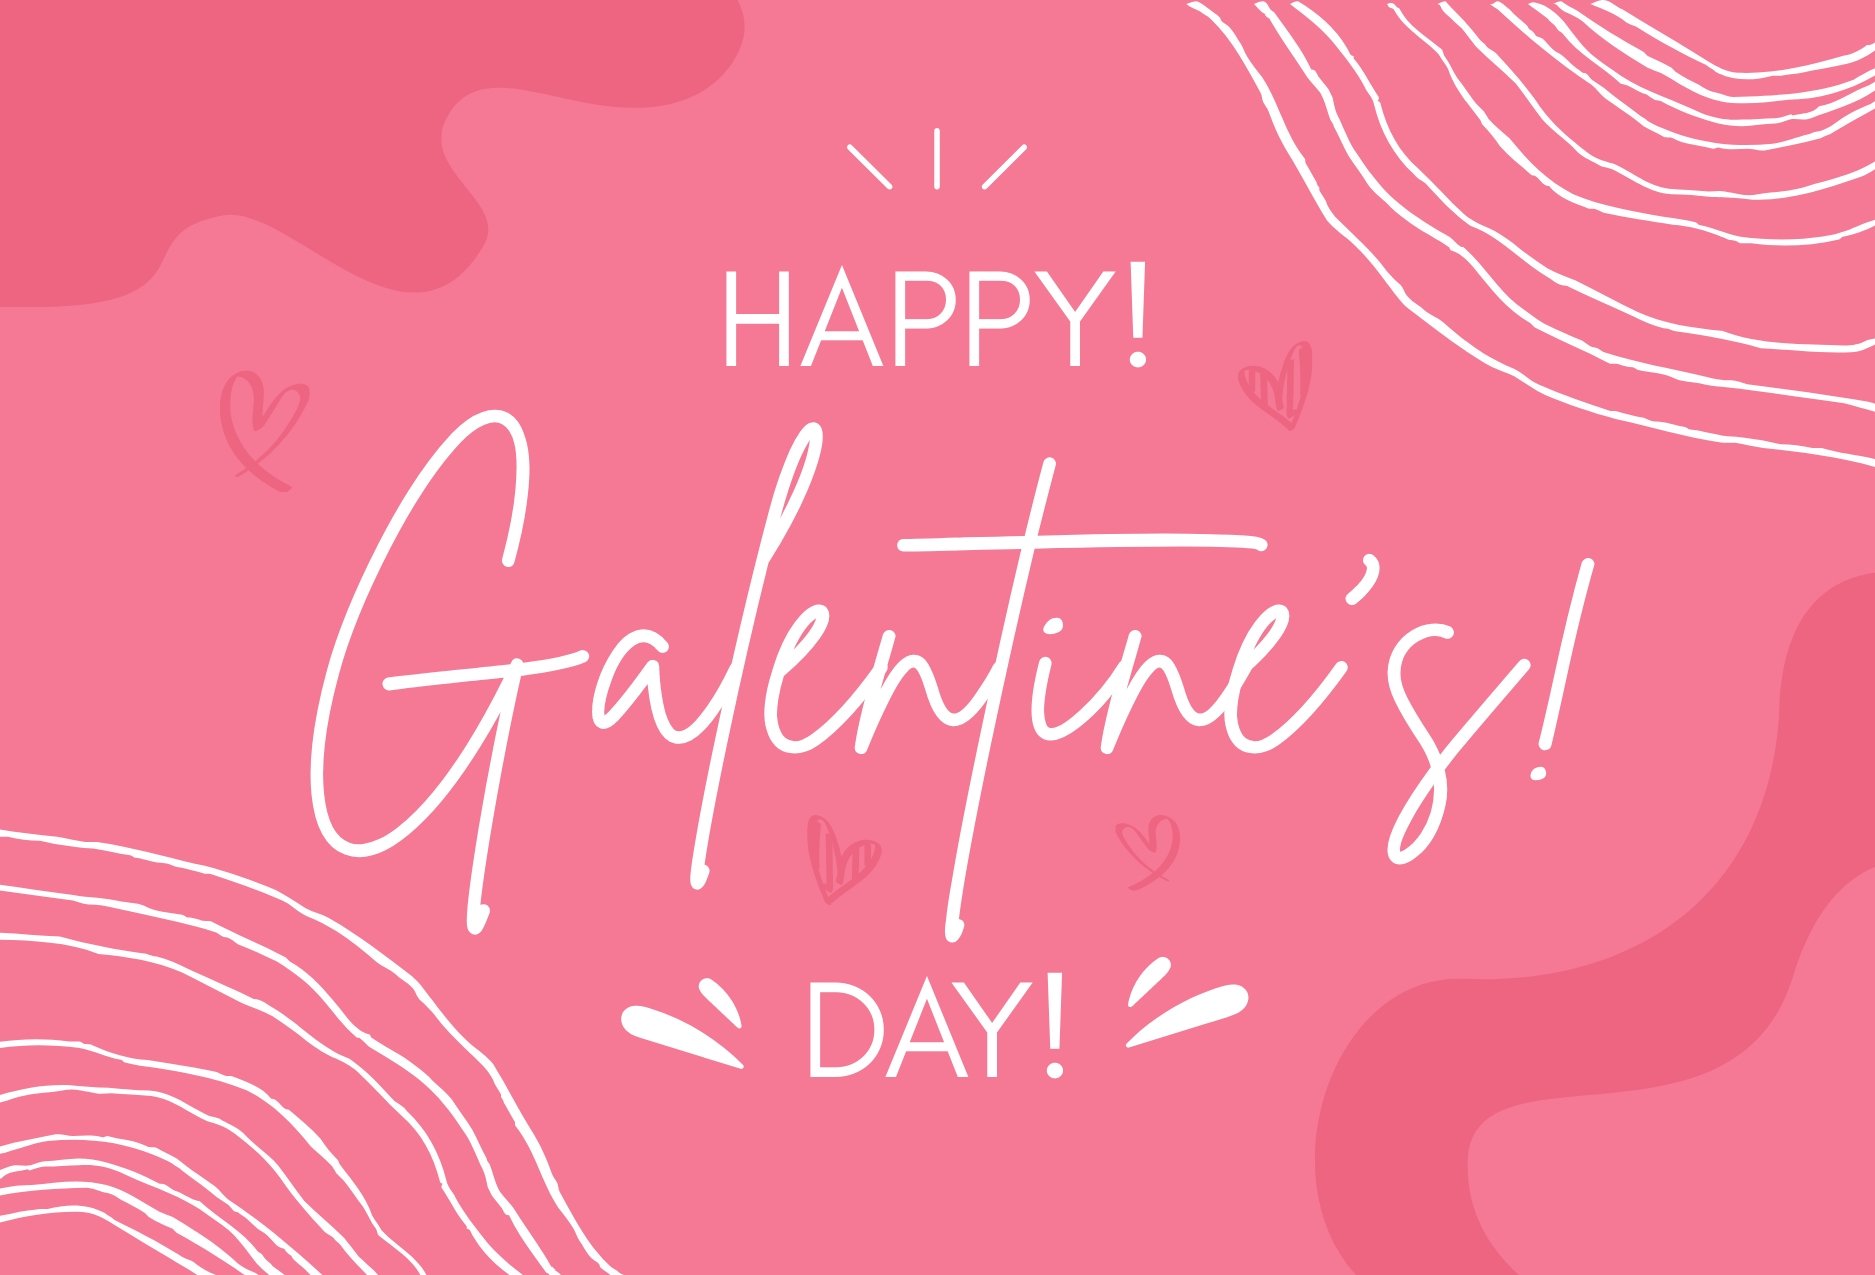 free-printable-galentine-s-day-cards-for-your-lady-friends